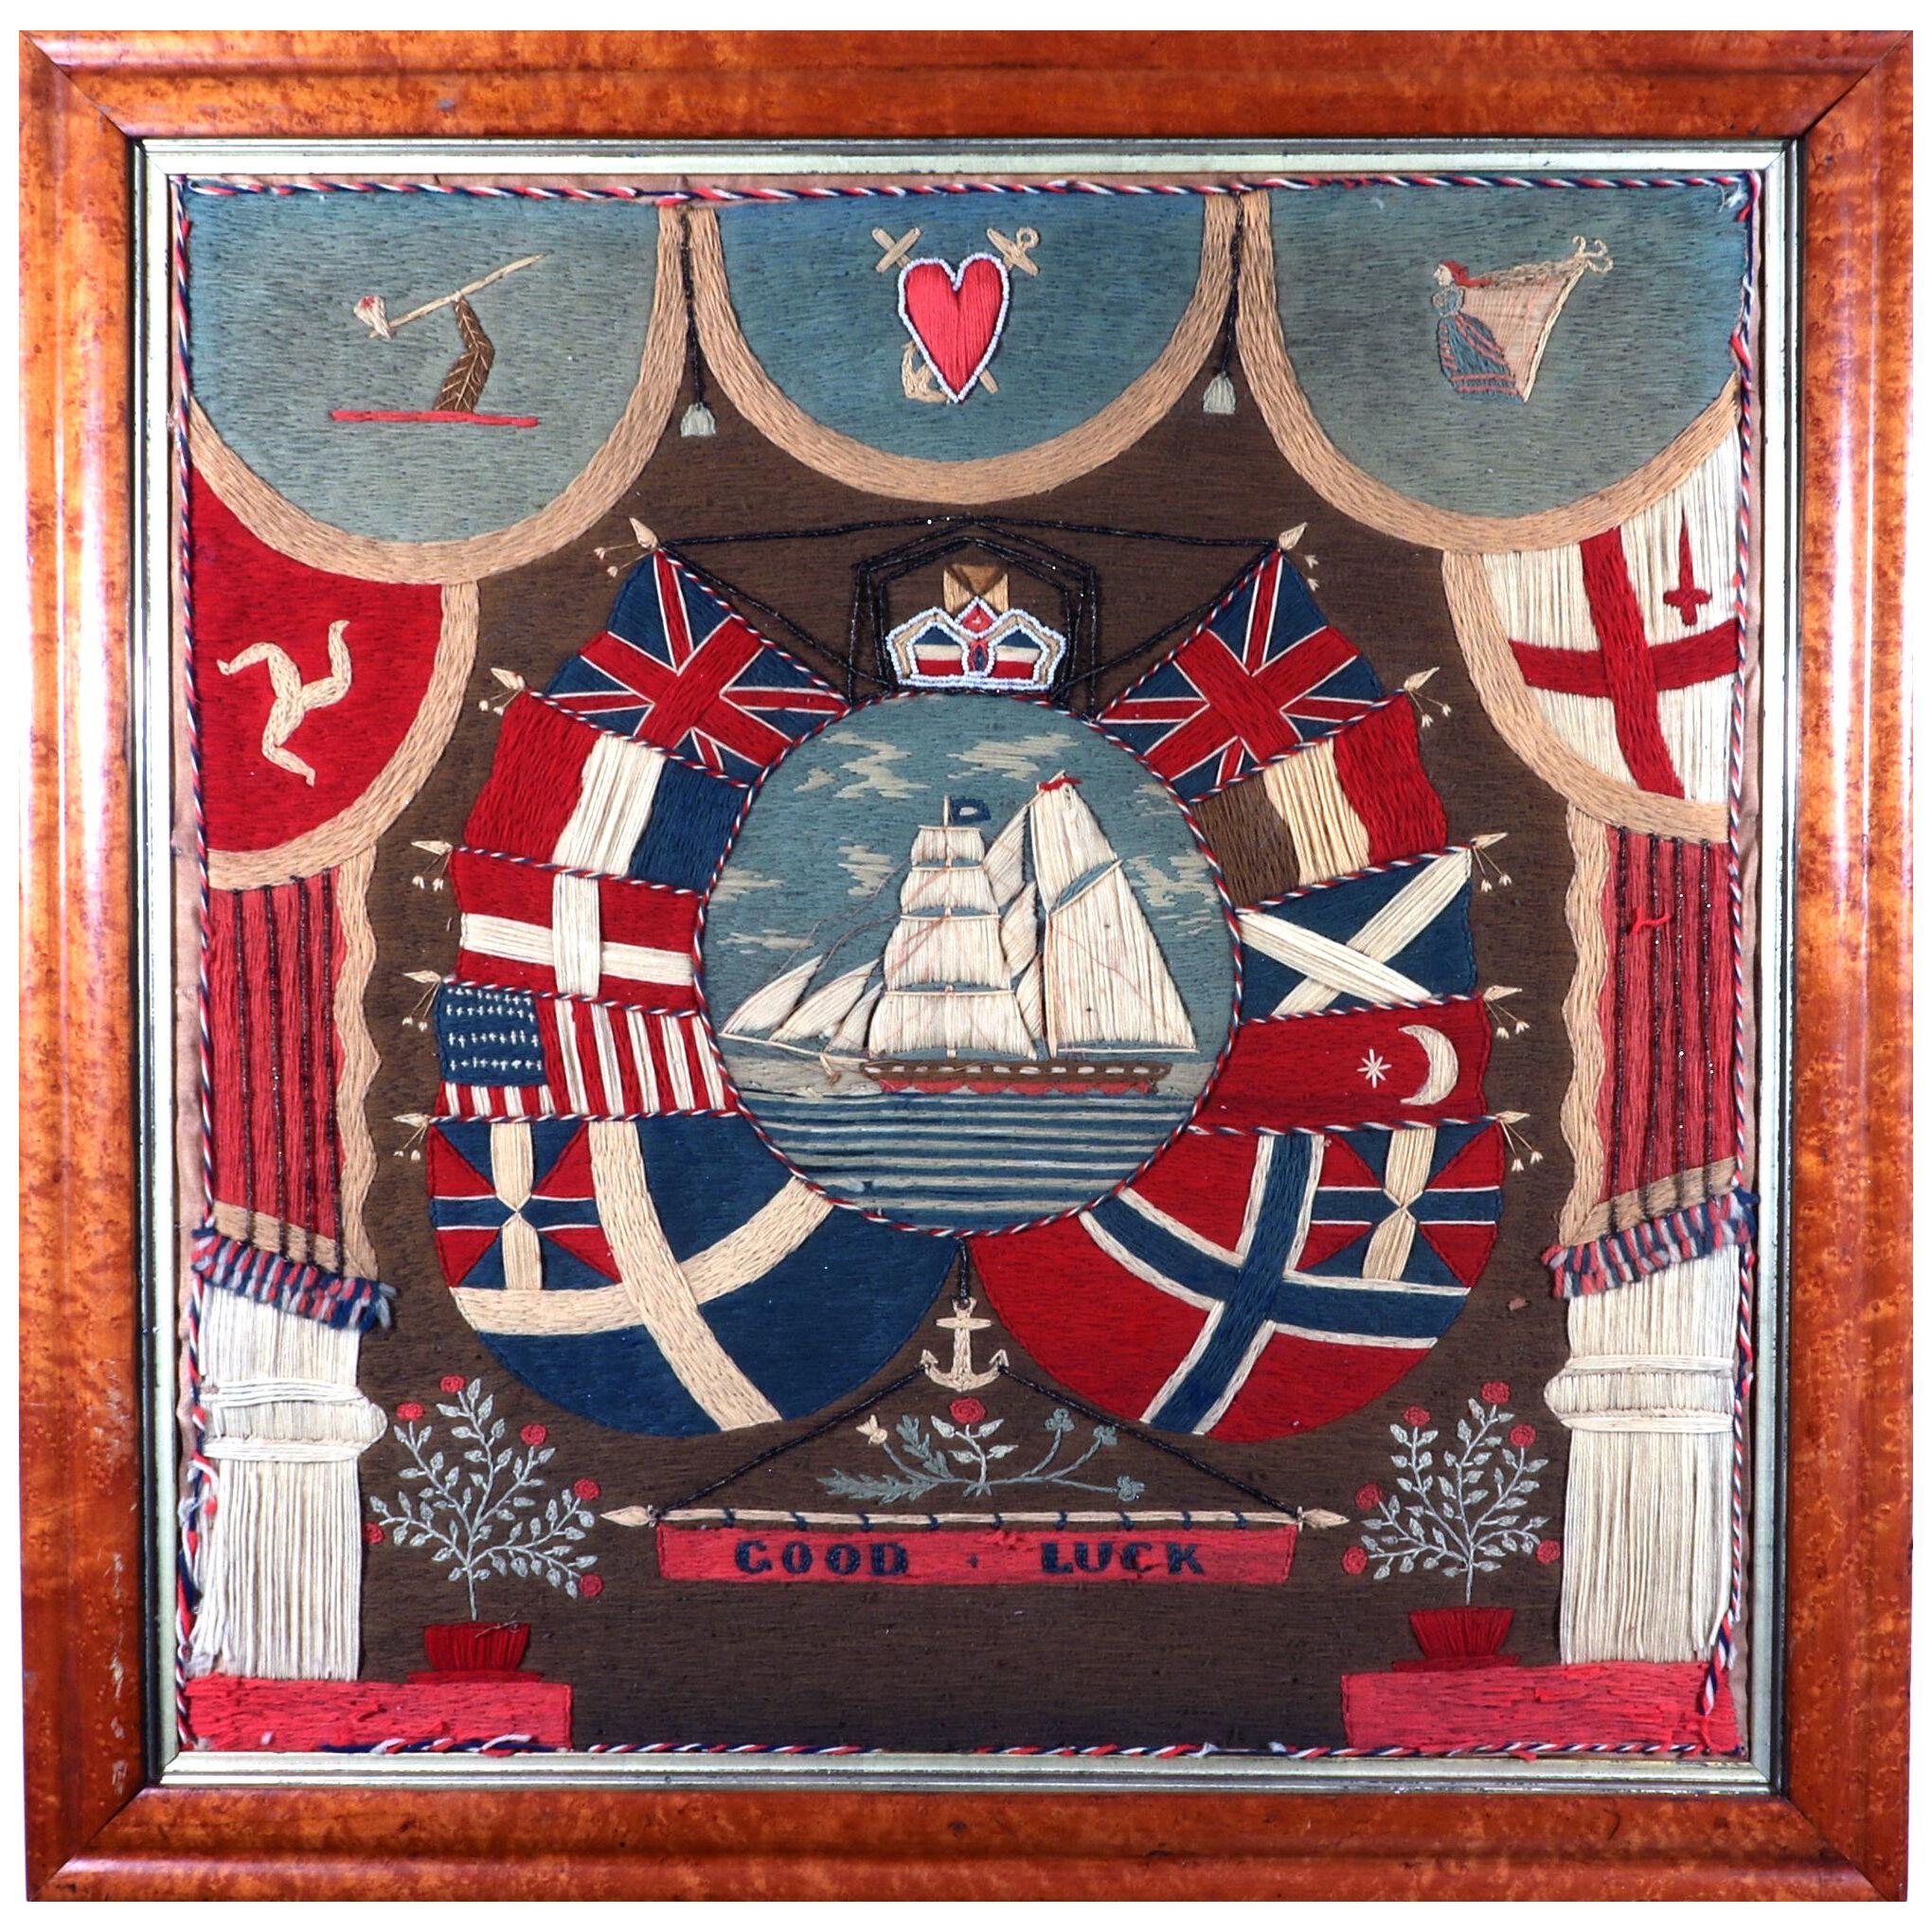 Sailor's Woolwork of Flag of Nations with Motto "GOOD LUCK" Motto